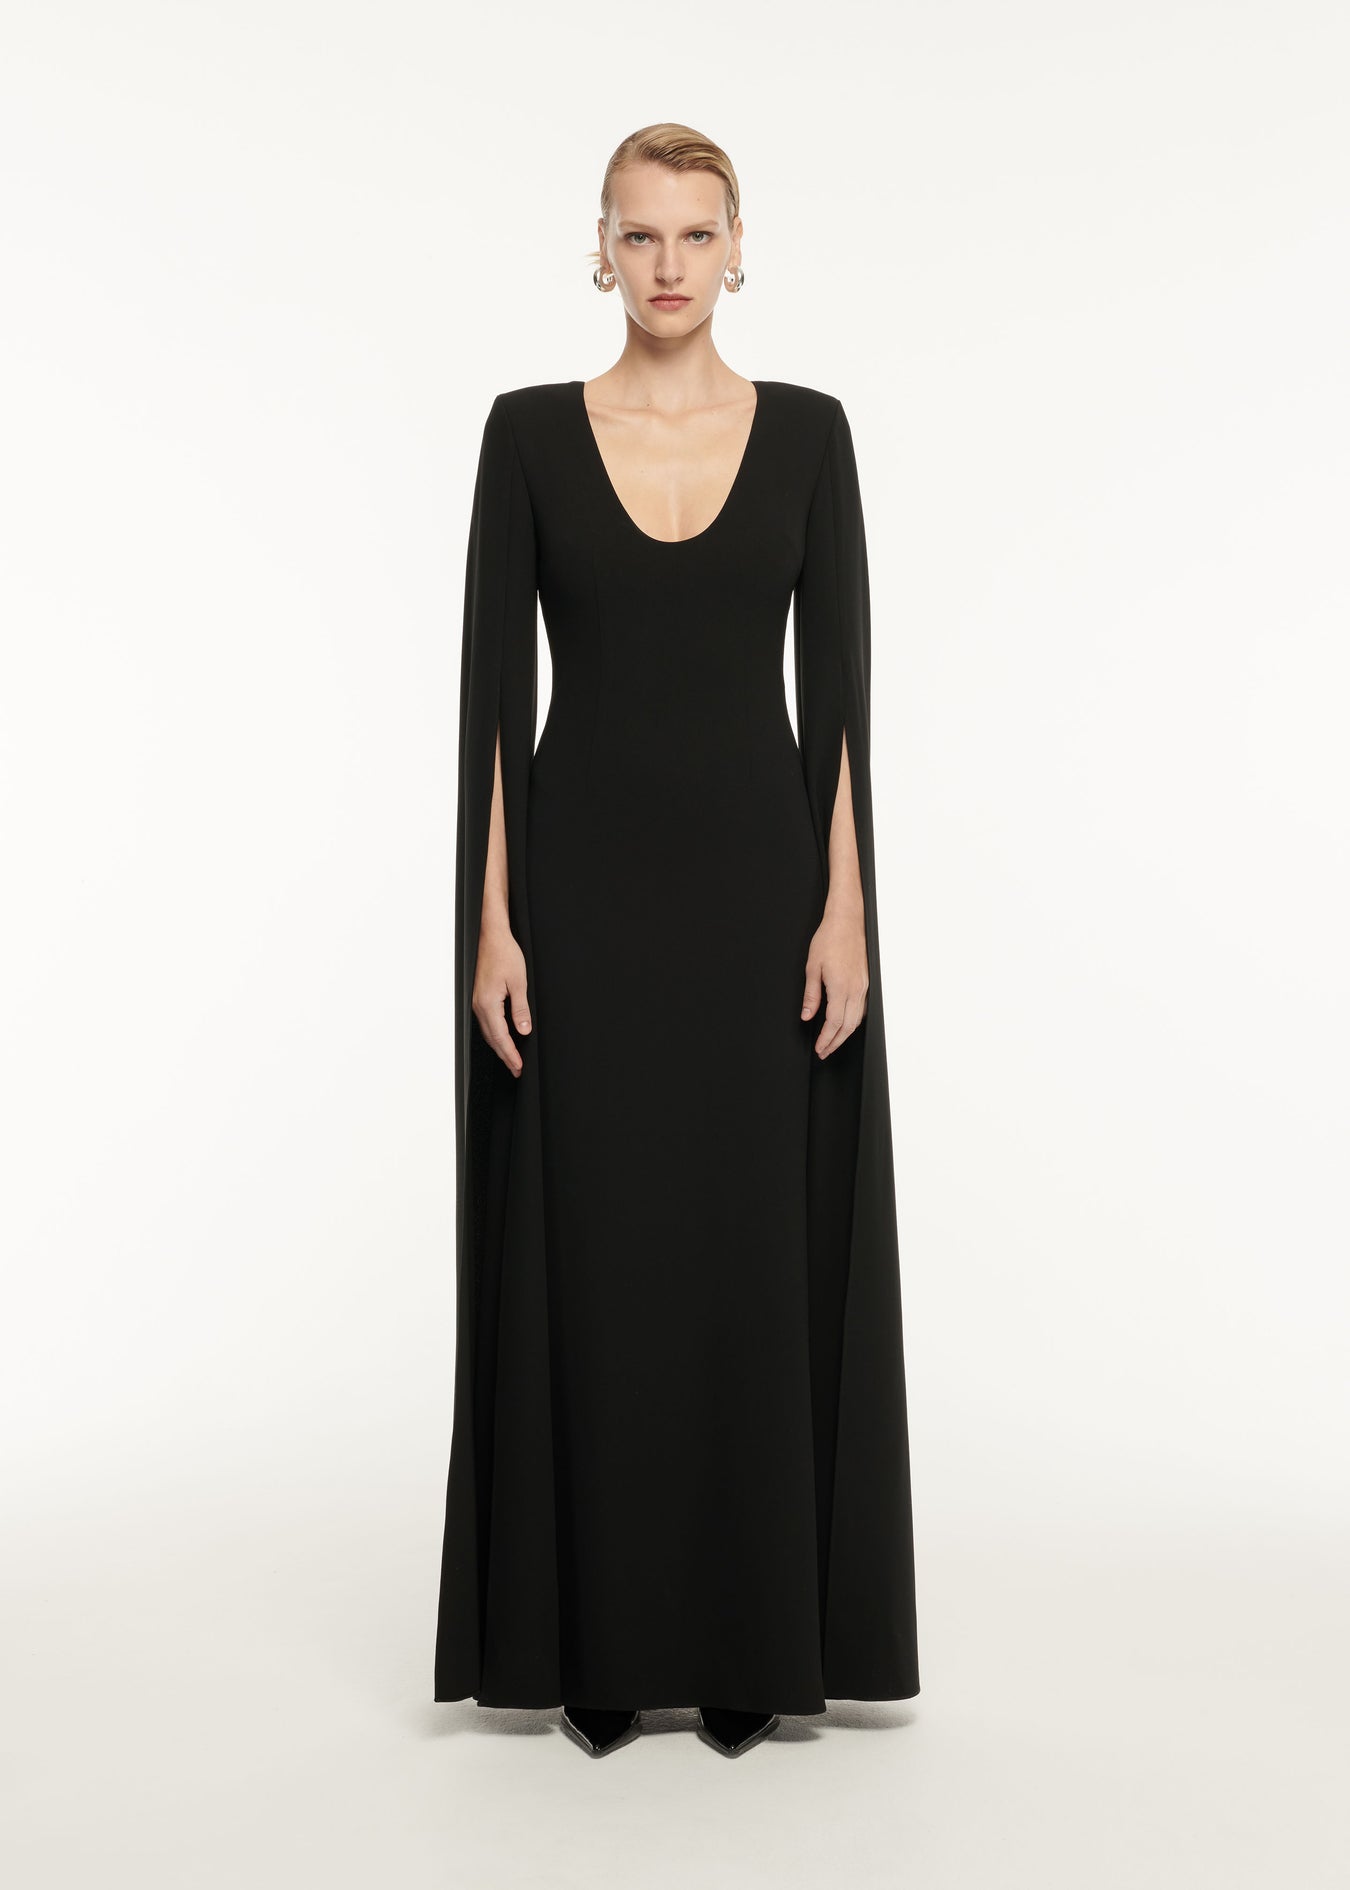 A woman wearing the Cape Sleeve Stretch Cady Maxi Dress in Black